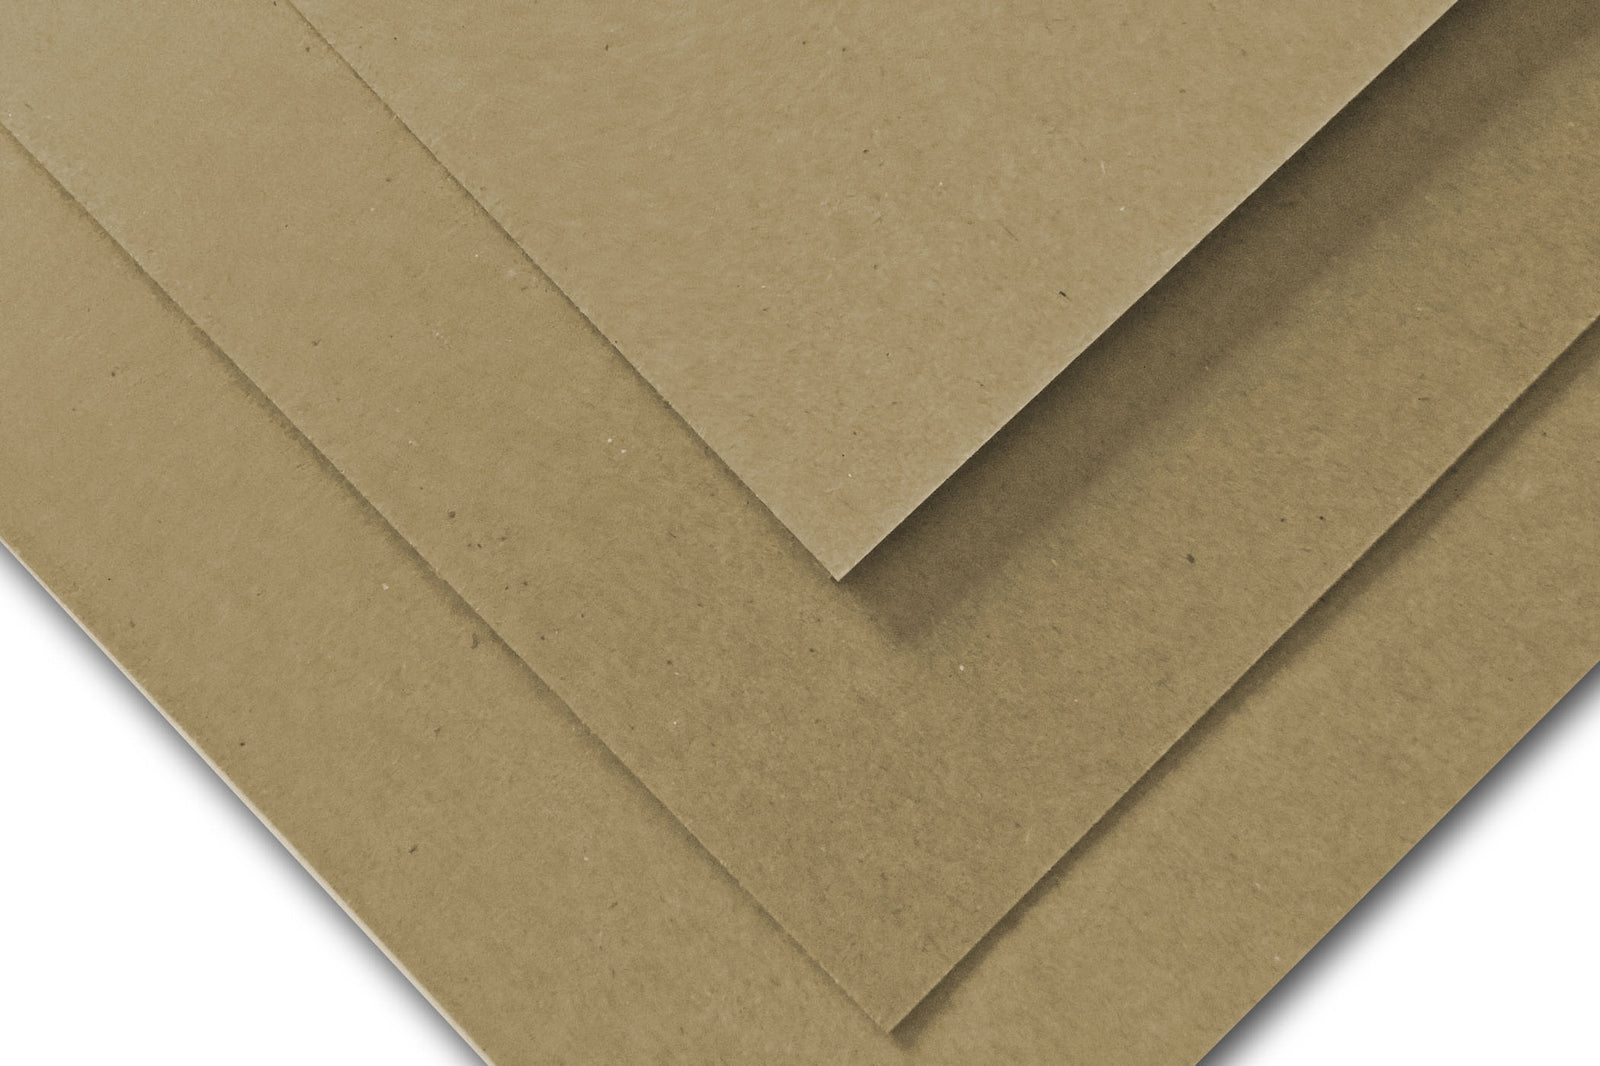 Recycled Brown Bag Paper for flyers, menus, paper crafting projects -  CutCardStock